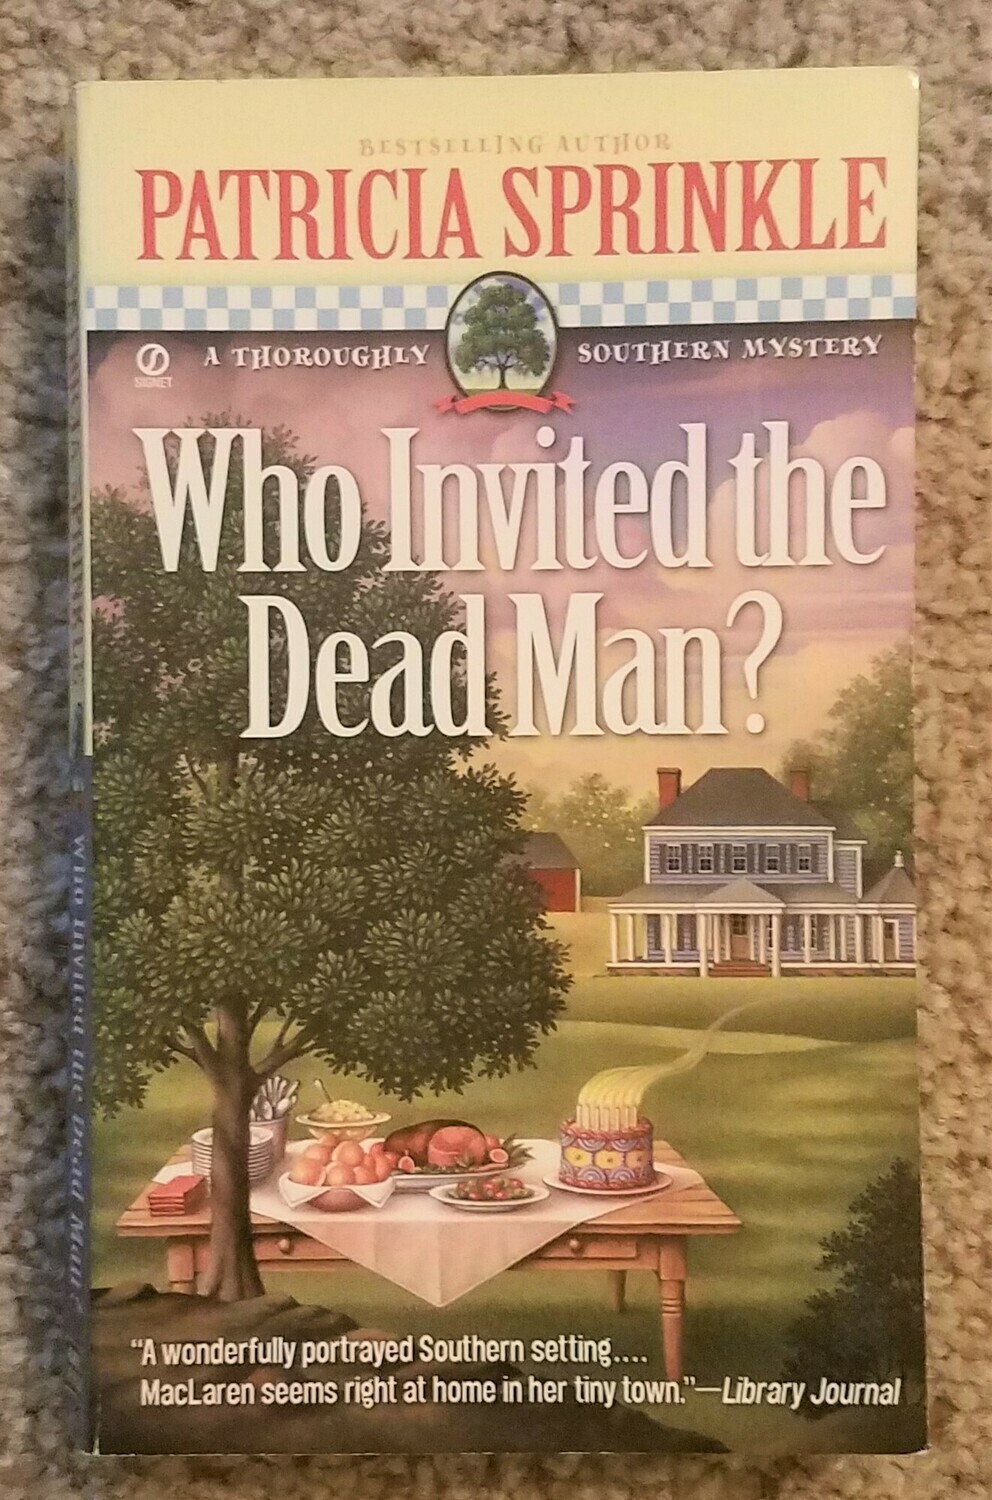 Who Invited the Dead Man? by Patricia Sprinkle